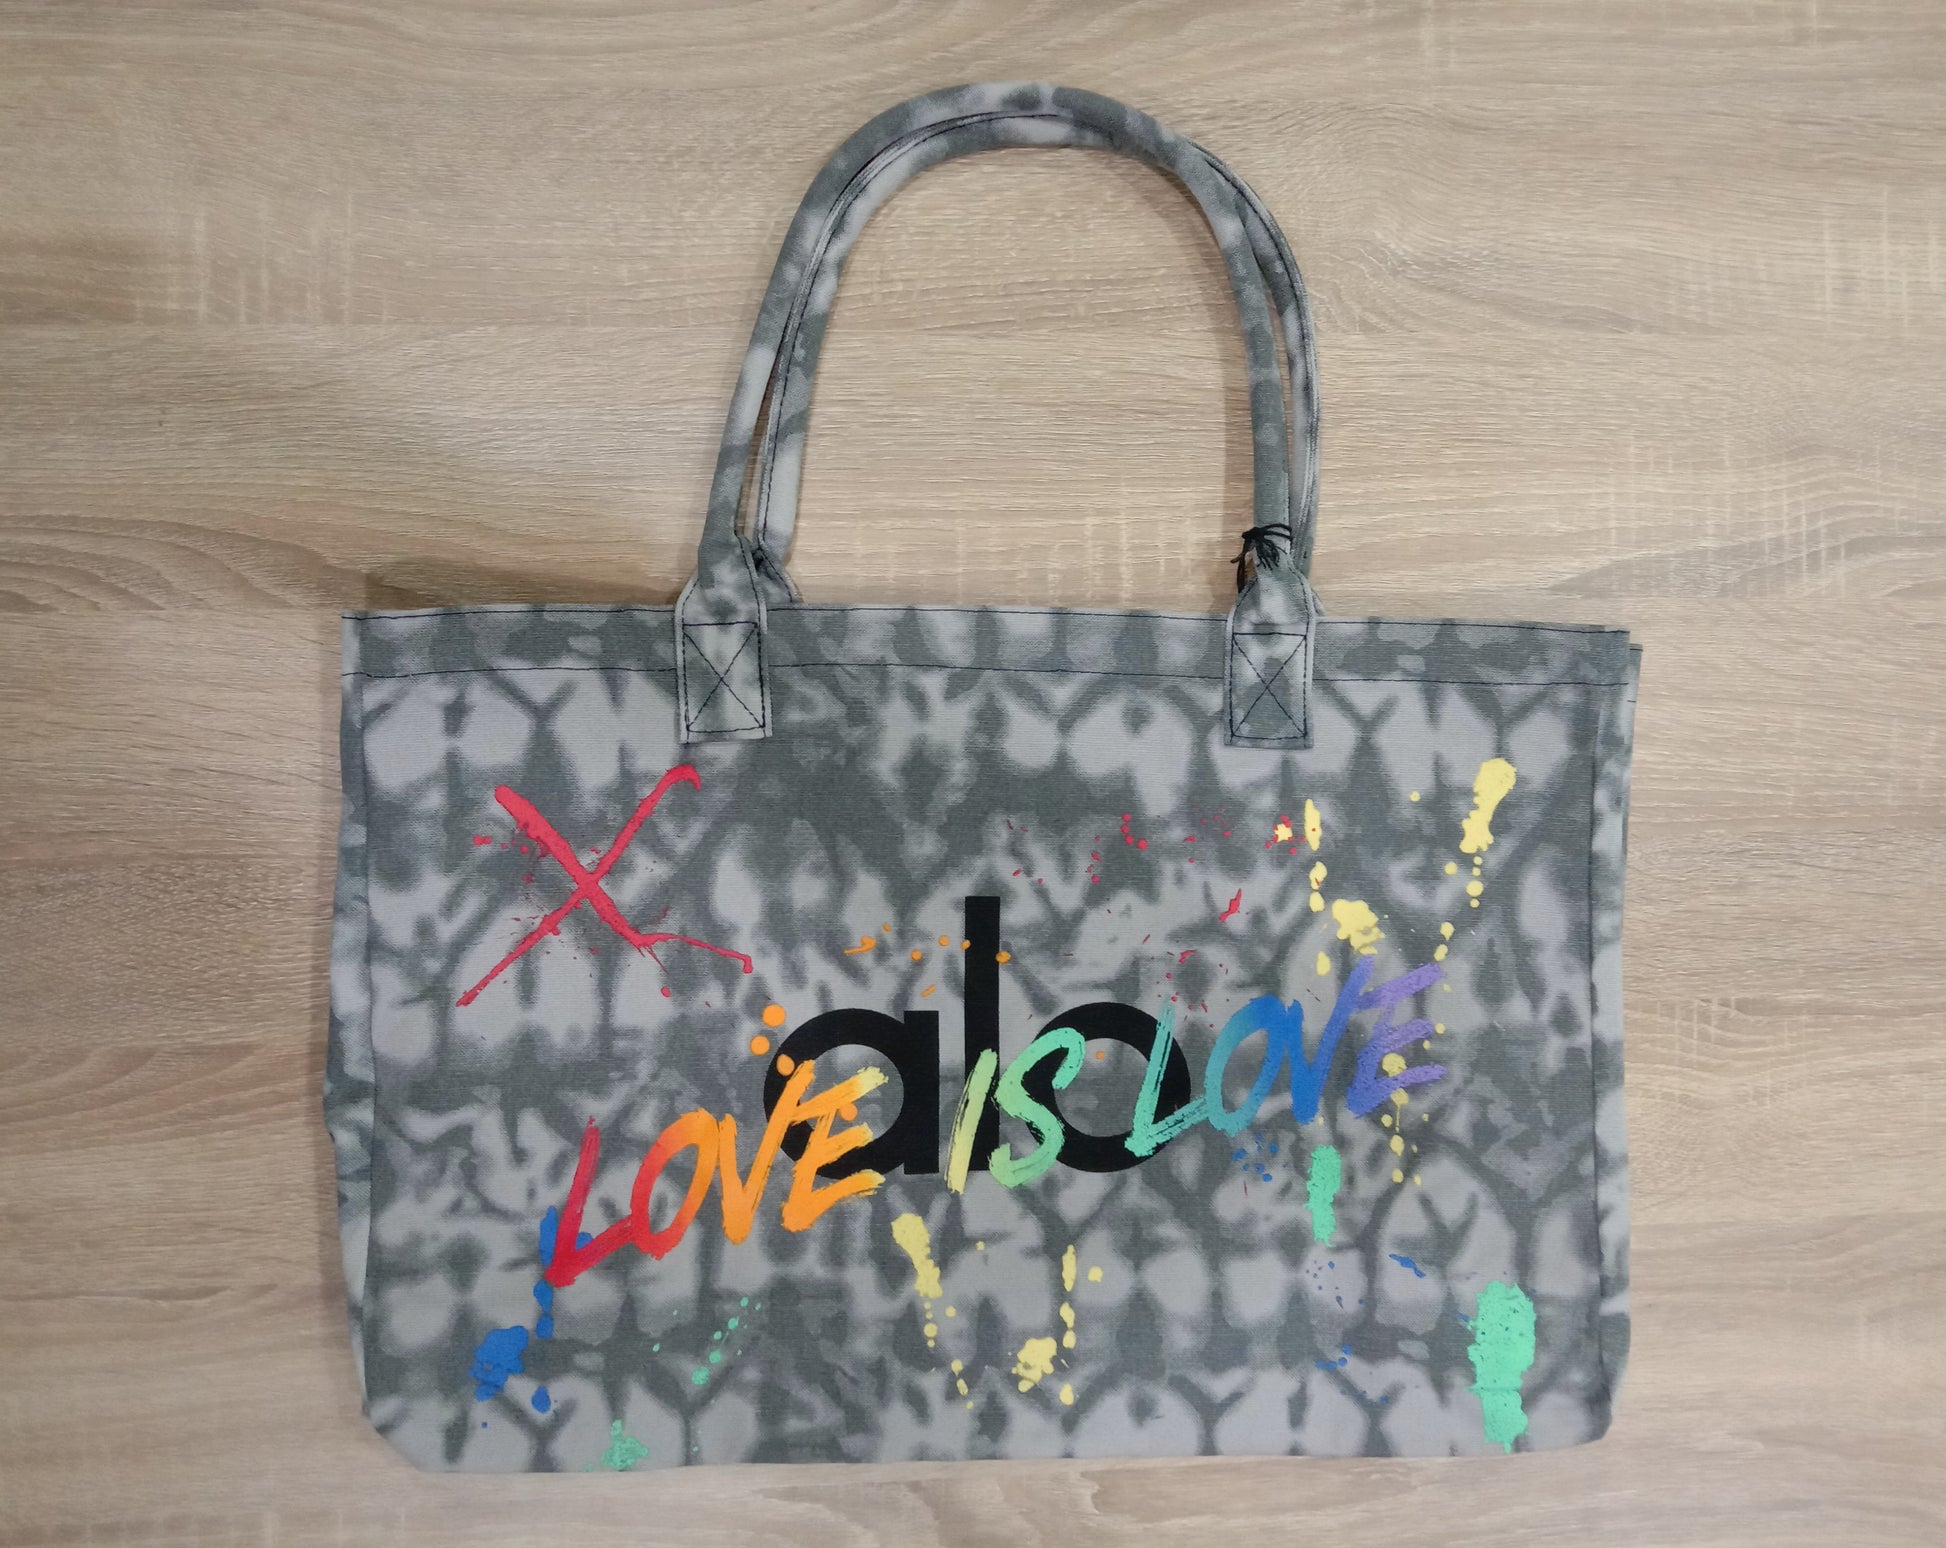 Alo Special Edition Yoga Tote Bag NEW for Sale in Huntington Beach